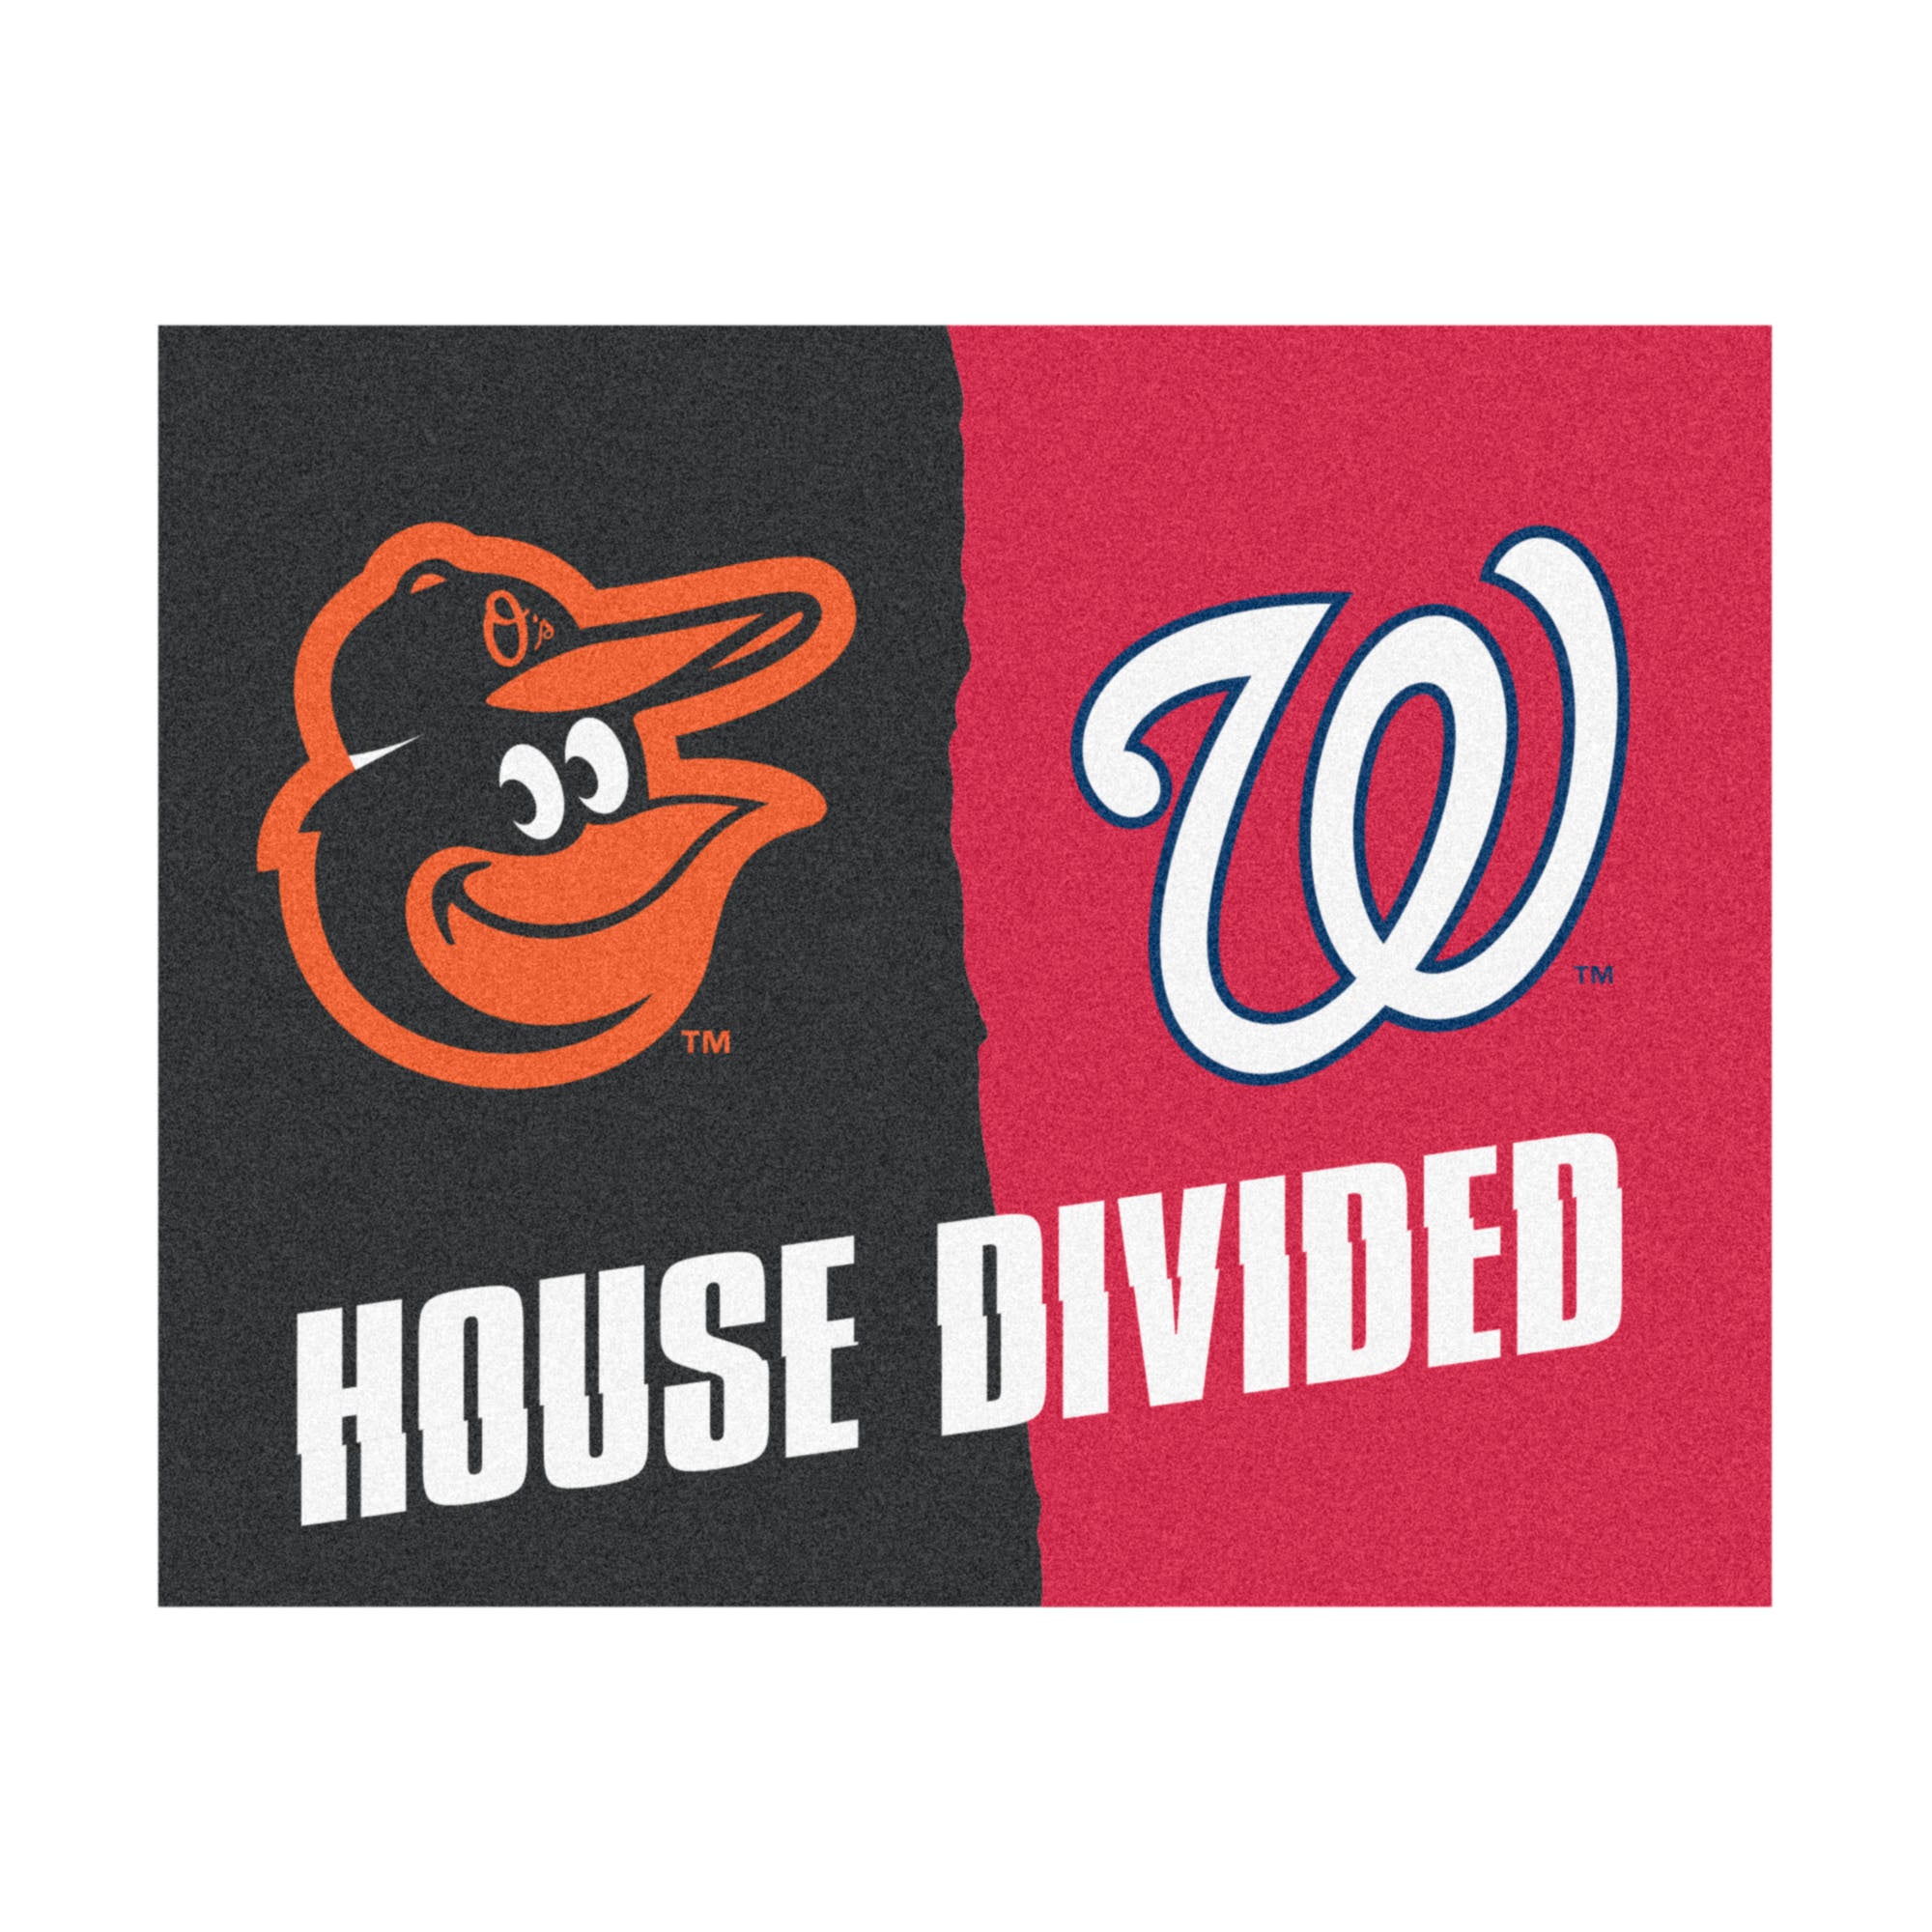 FANMATS, MLB House Divided - Orioles / Nationals House Divided Rug